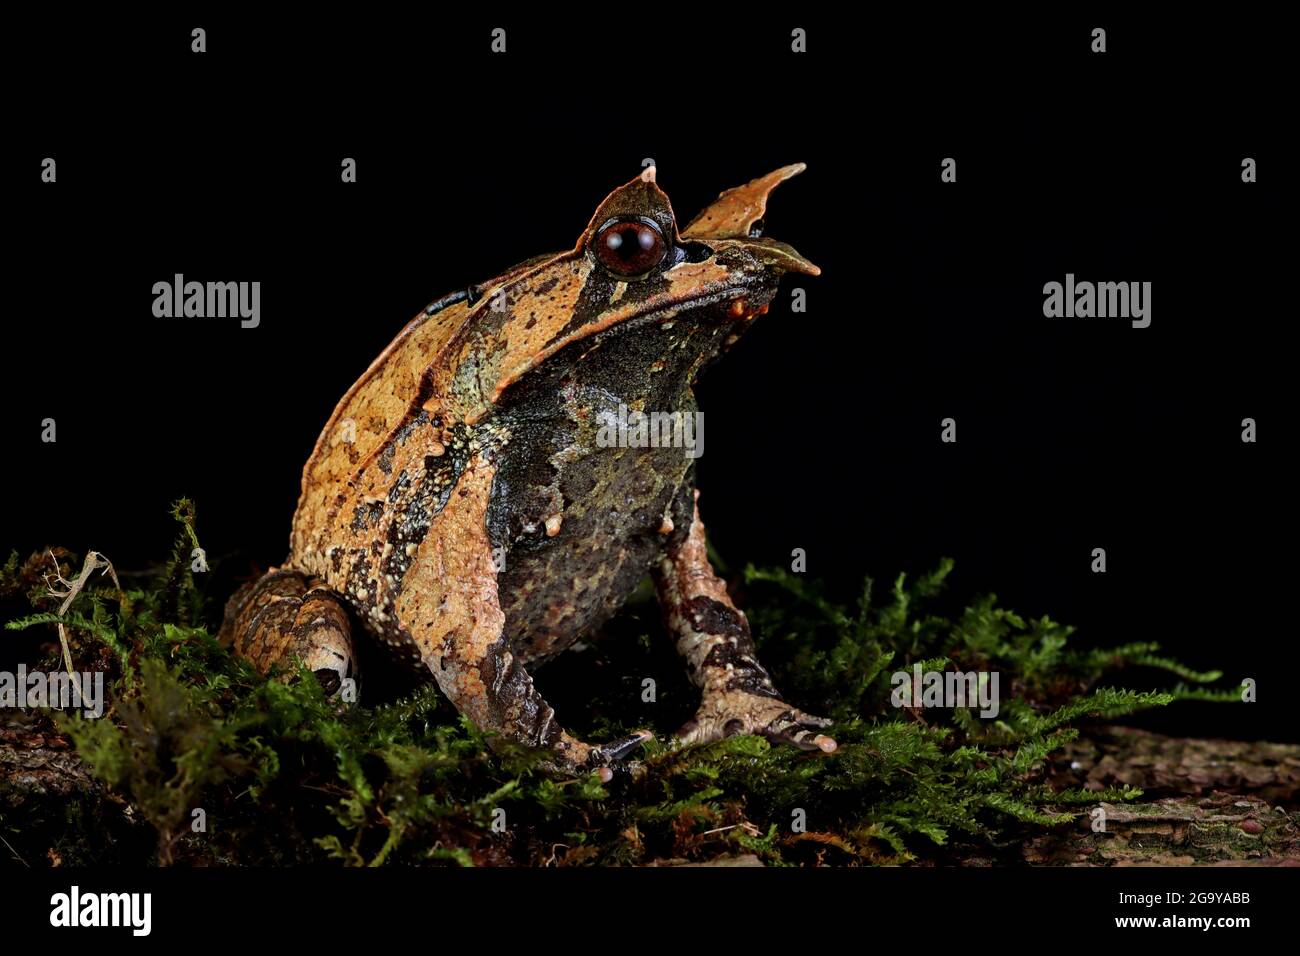 Malayan horned frog on a mossy rock, Indonesia Stock Photo